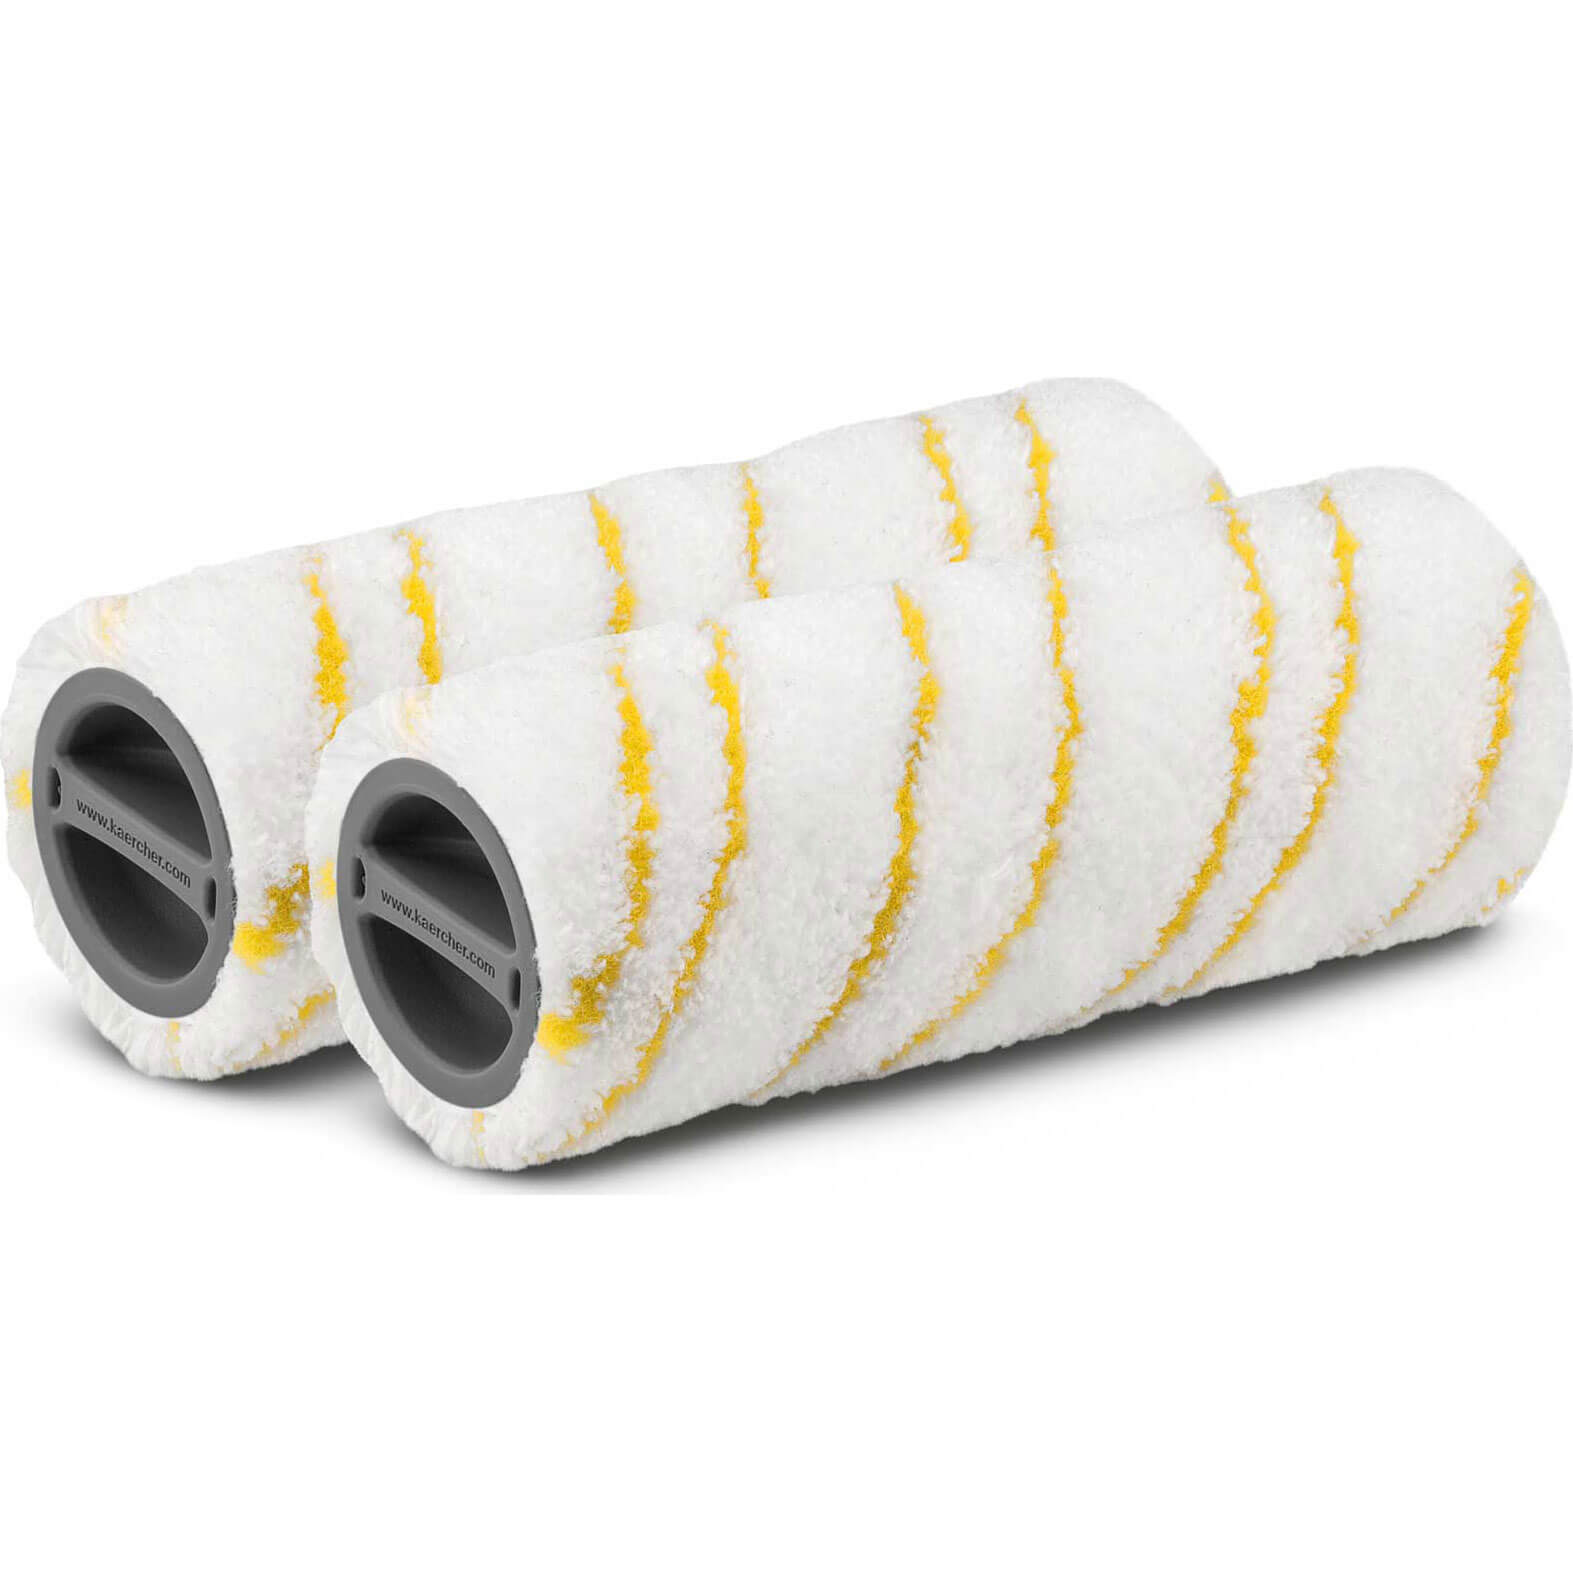 Image of Karcher Lint Free Rollers for FC 5 Floor Cleaners Yellow Pack of 2